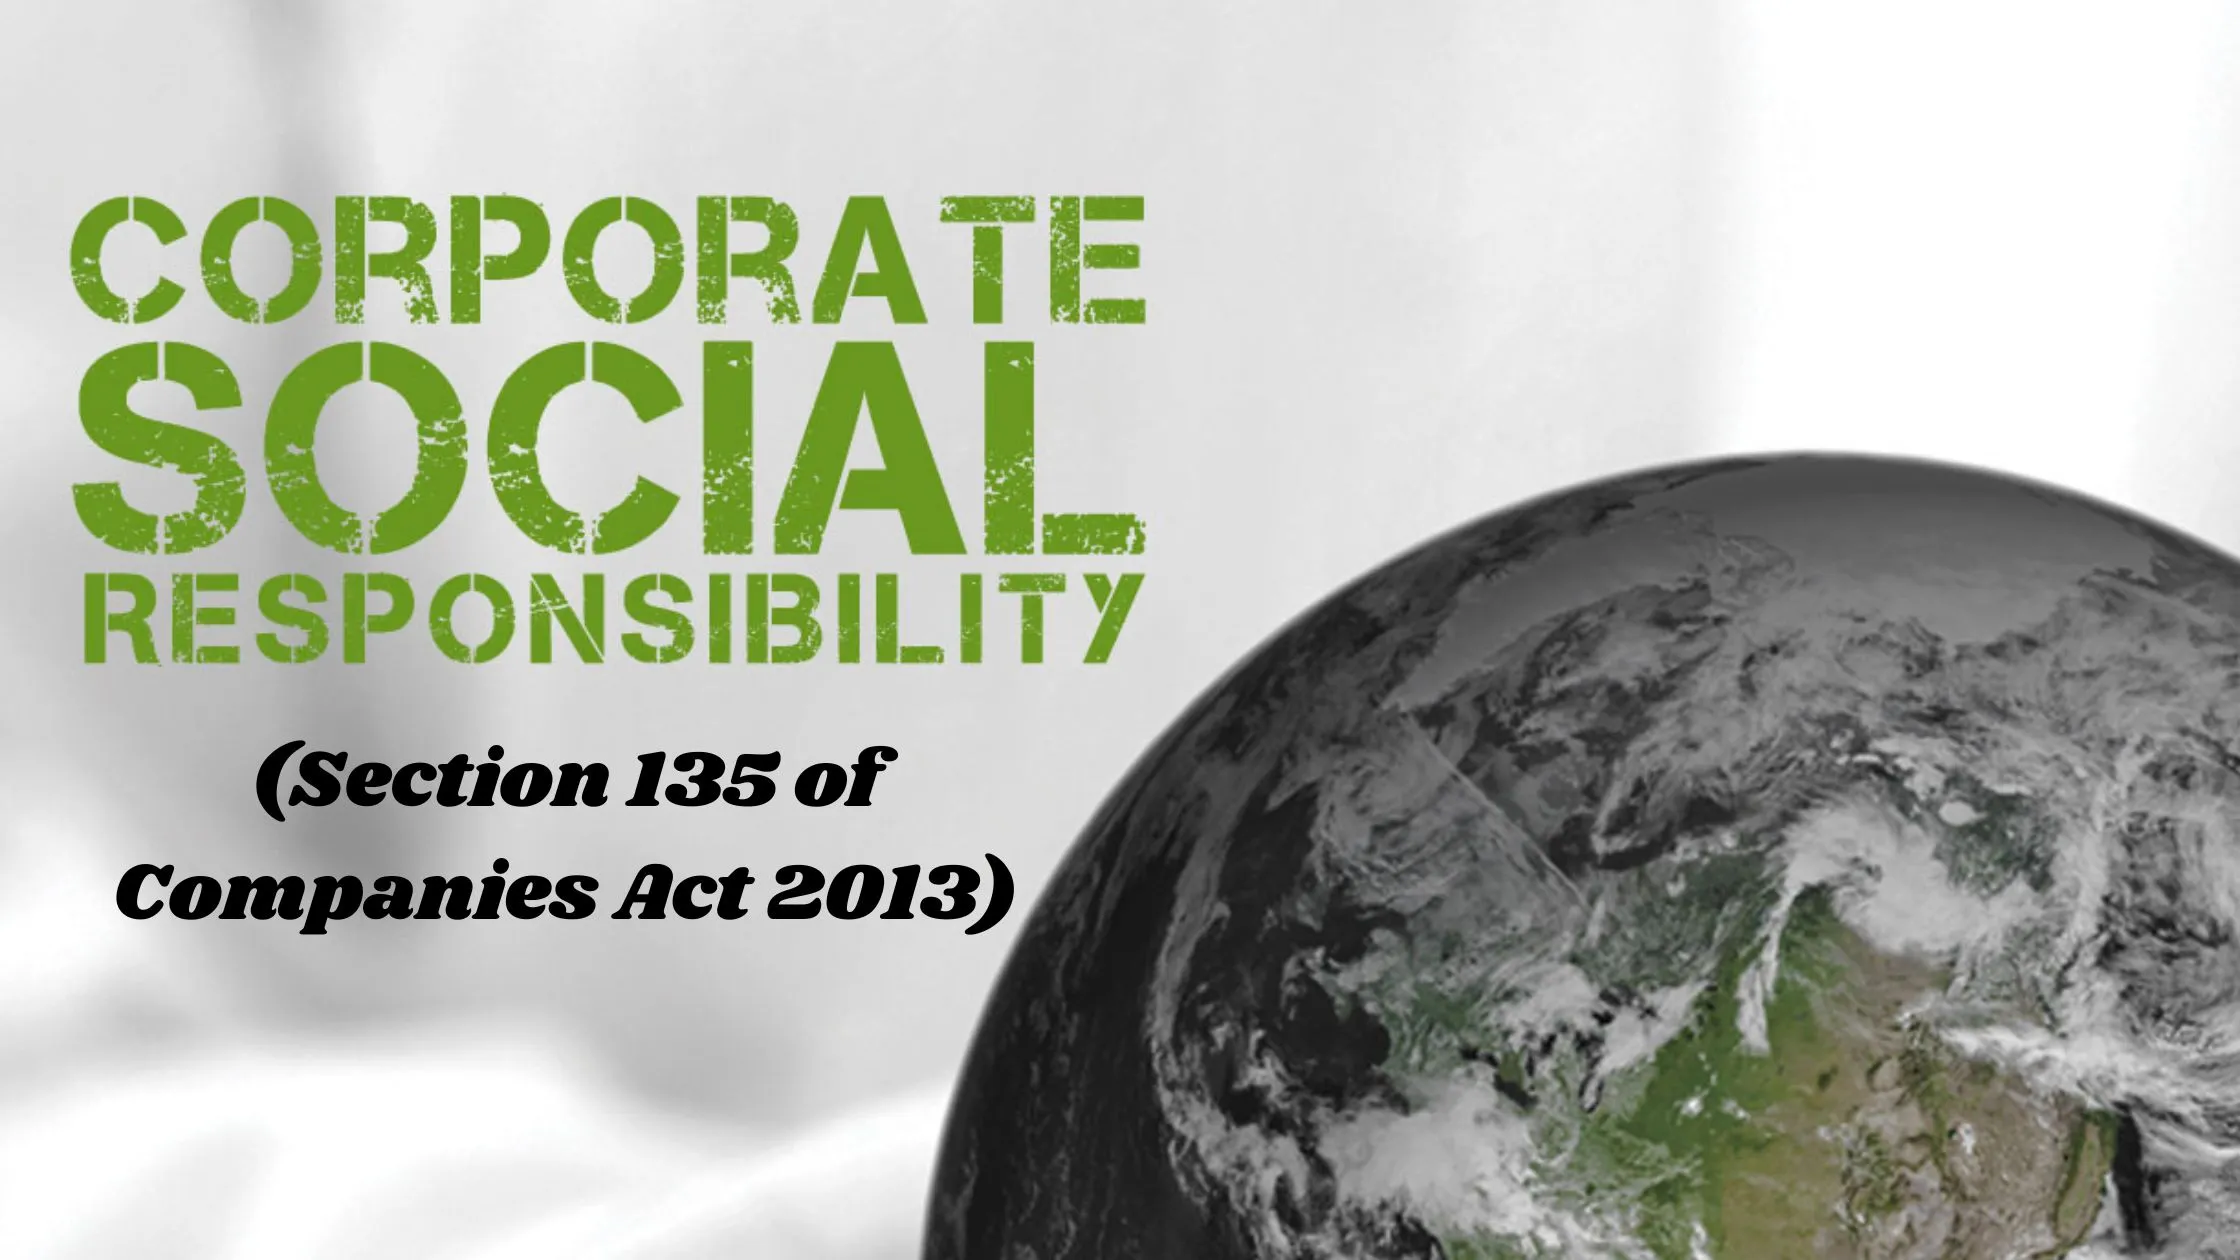 Corporate Social Responsibility - Section 135 of Companies Act 2013